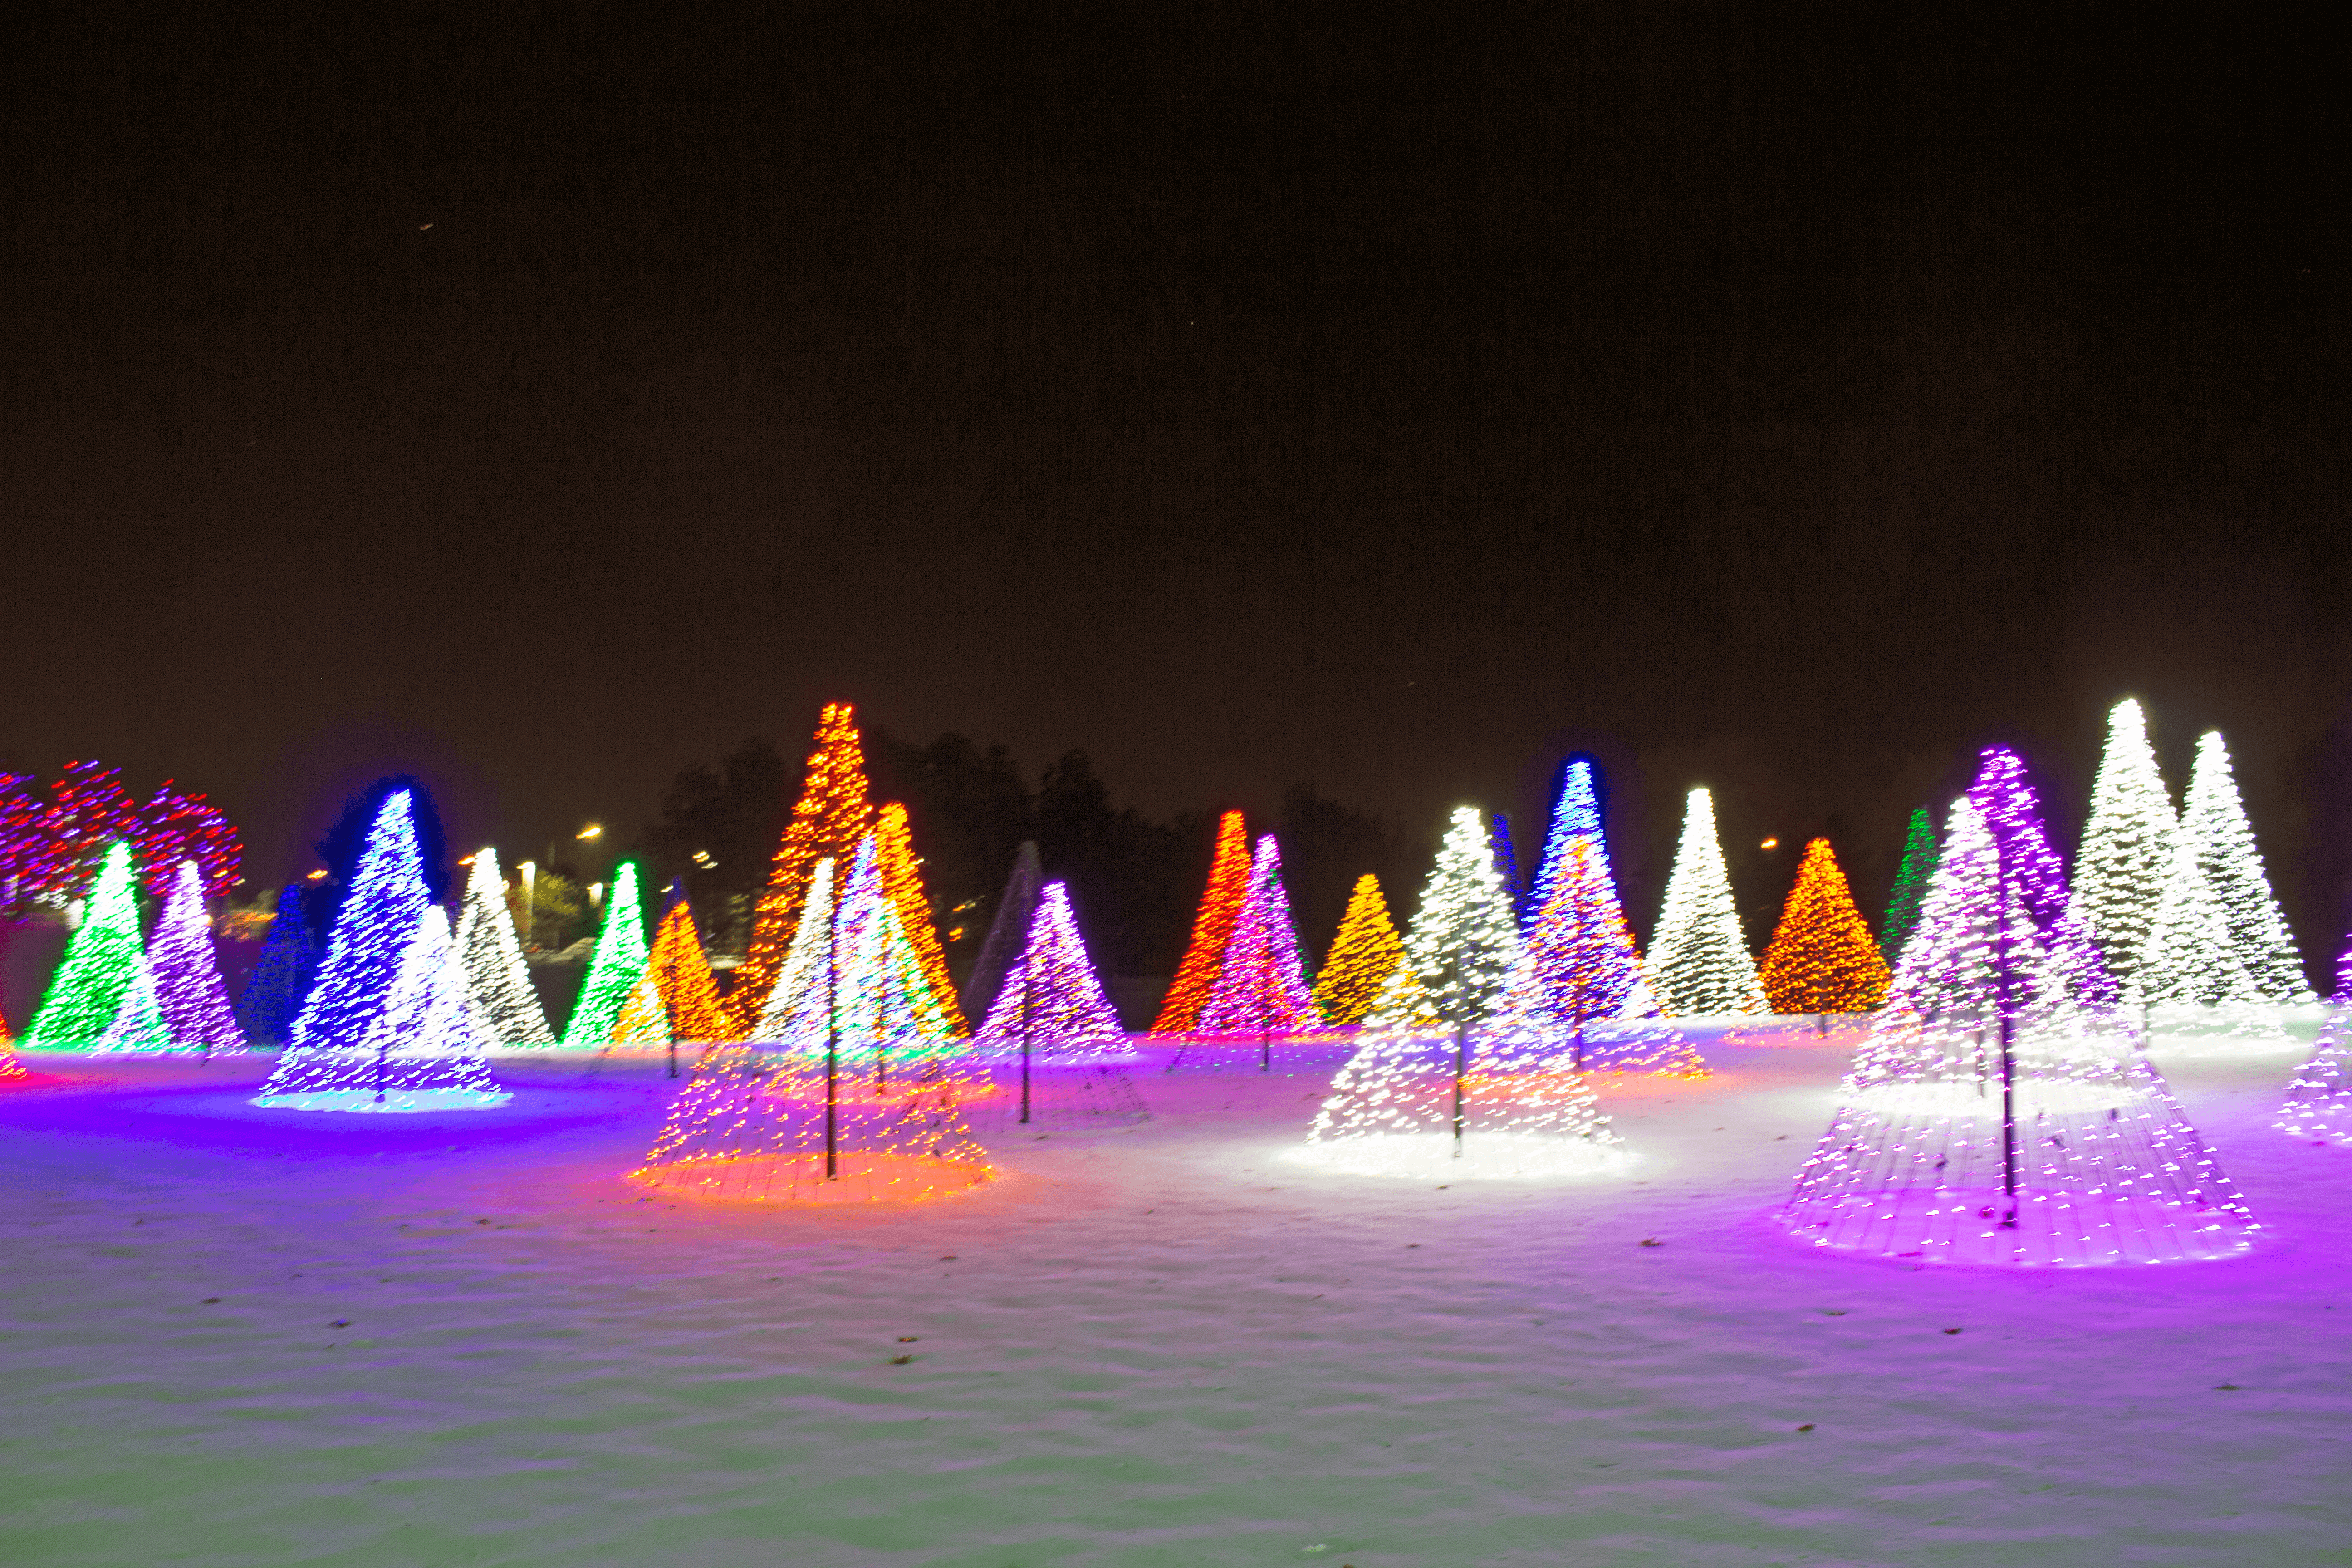 Christmas trees aglow on a snowy hill at A Hudson Christmas